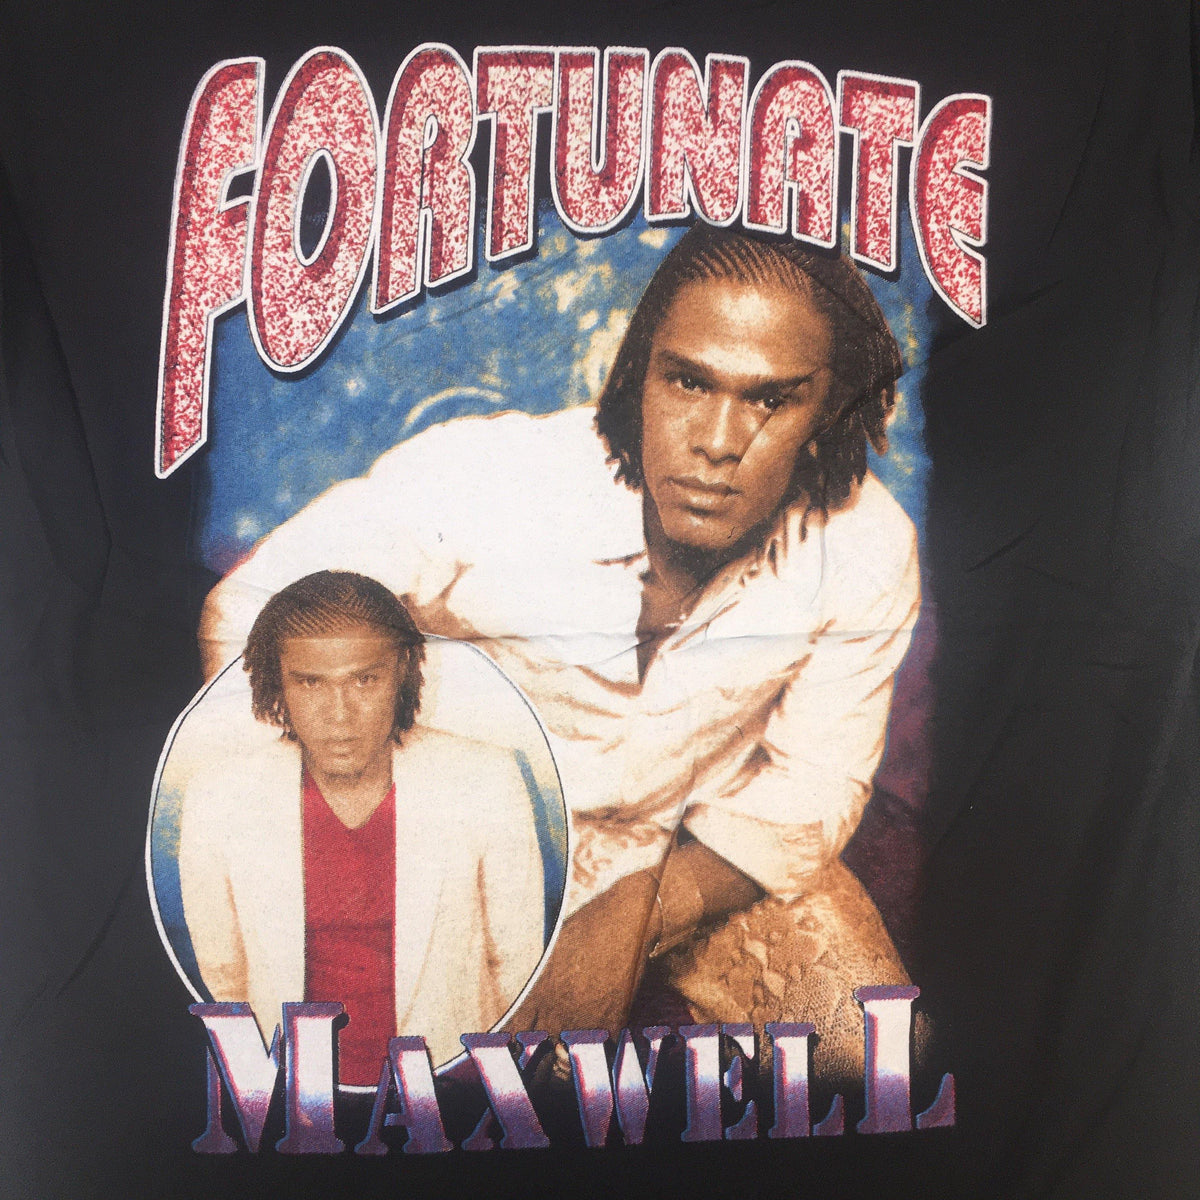 Vintage Maxwell &quot;Fortunate&quot; T-Shirt - jointcustodydc